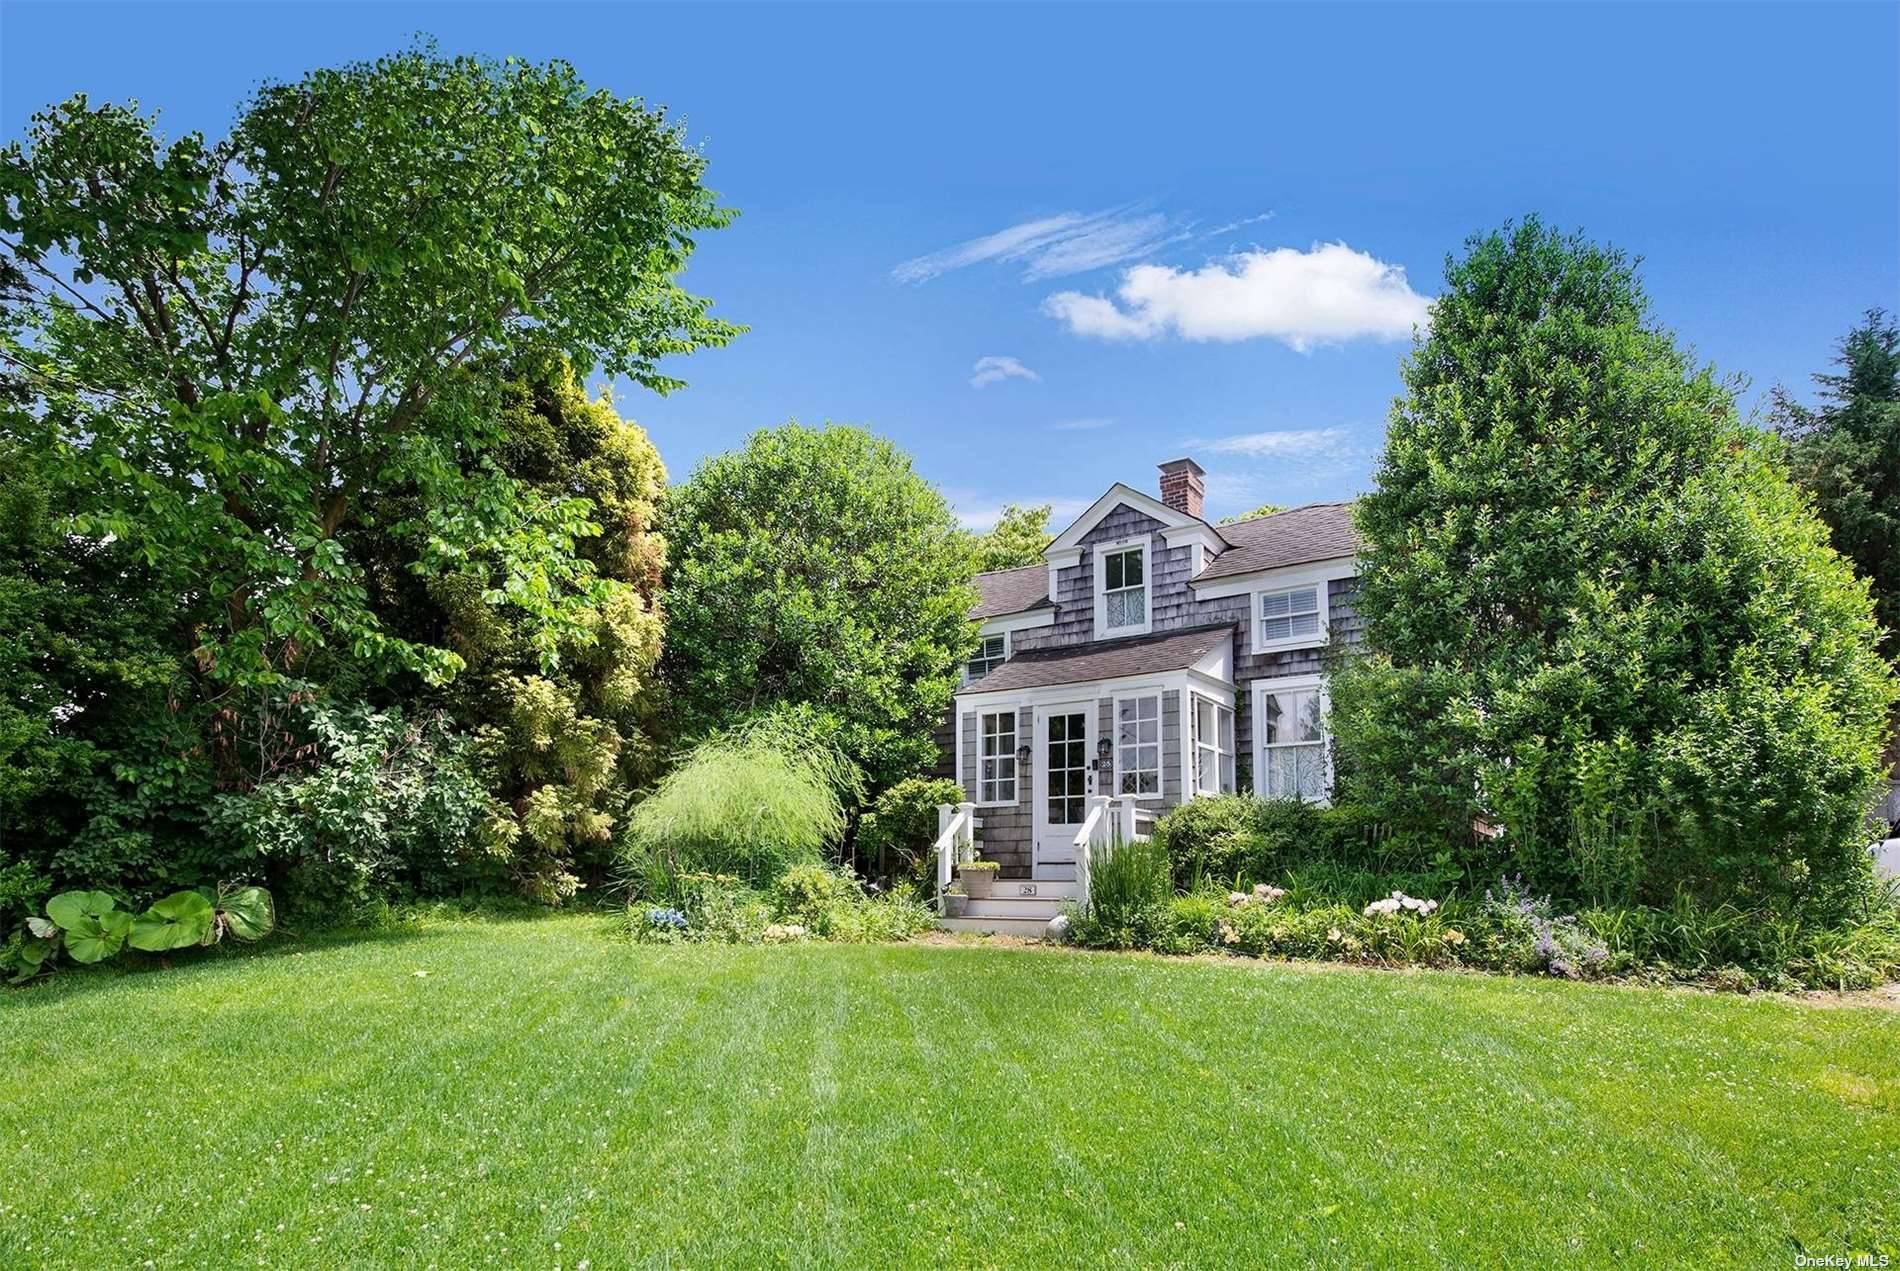 Located in the heart of Southampton Village, just a few blocks from renowned Main Street restaurants and shopping, sits a historic 3 bedroom shingle style home.